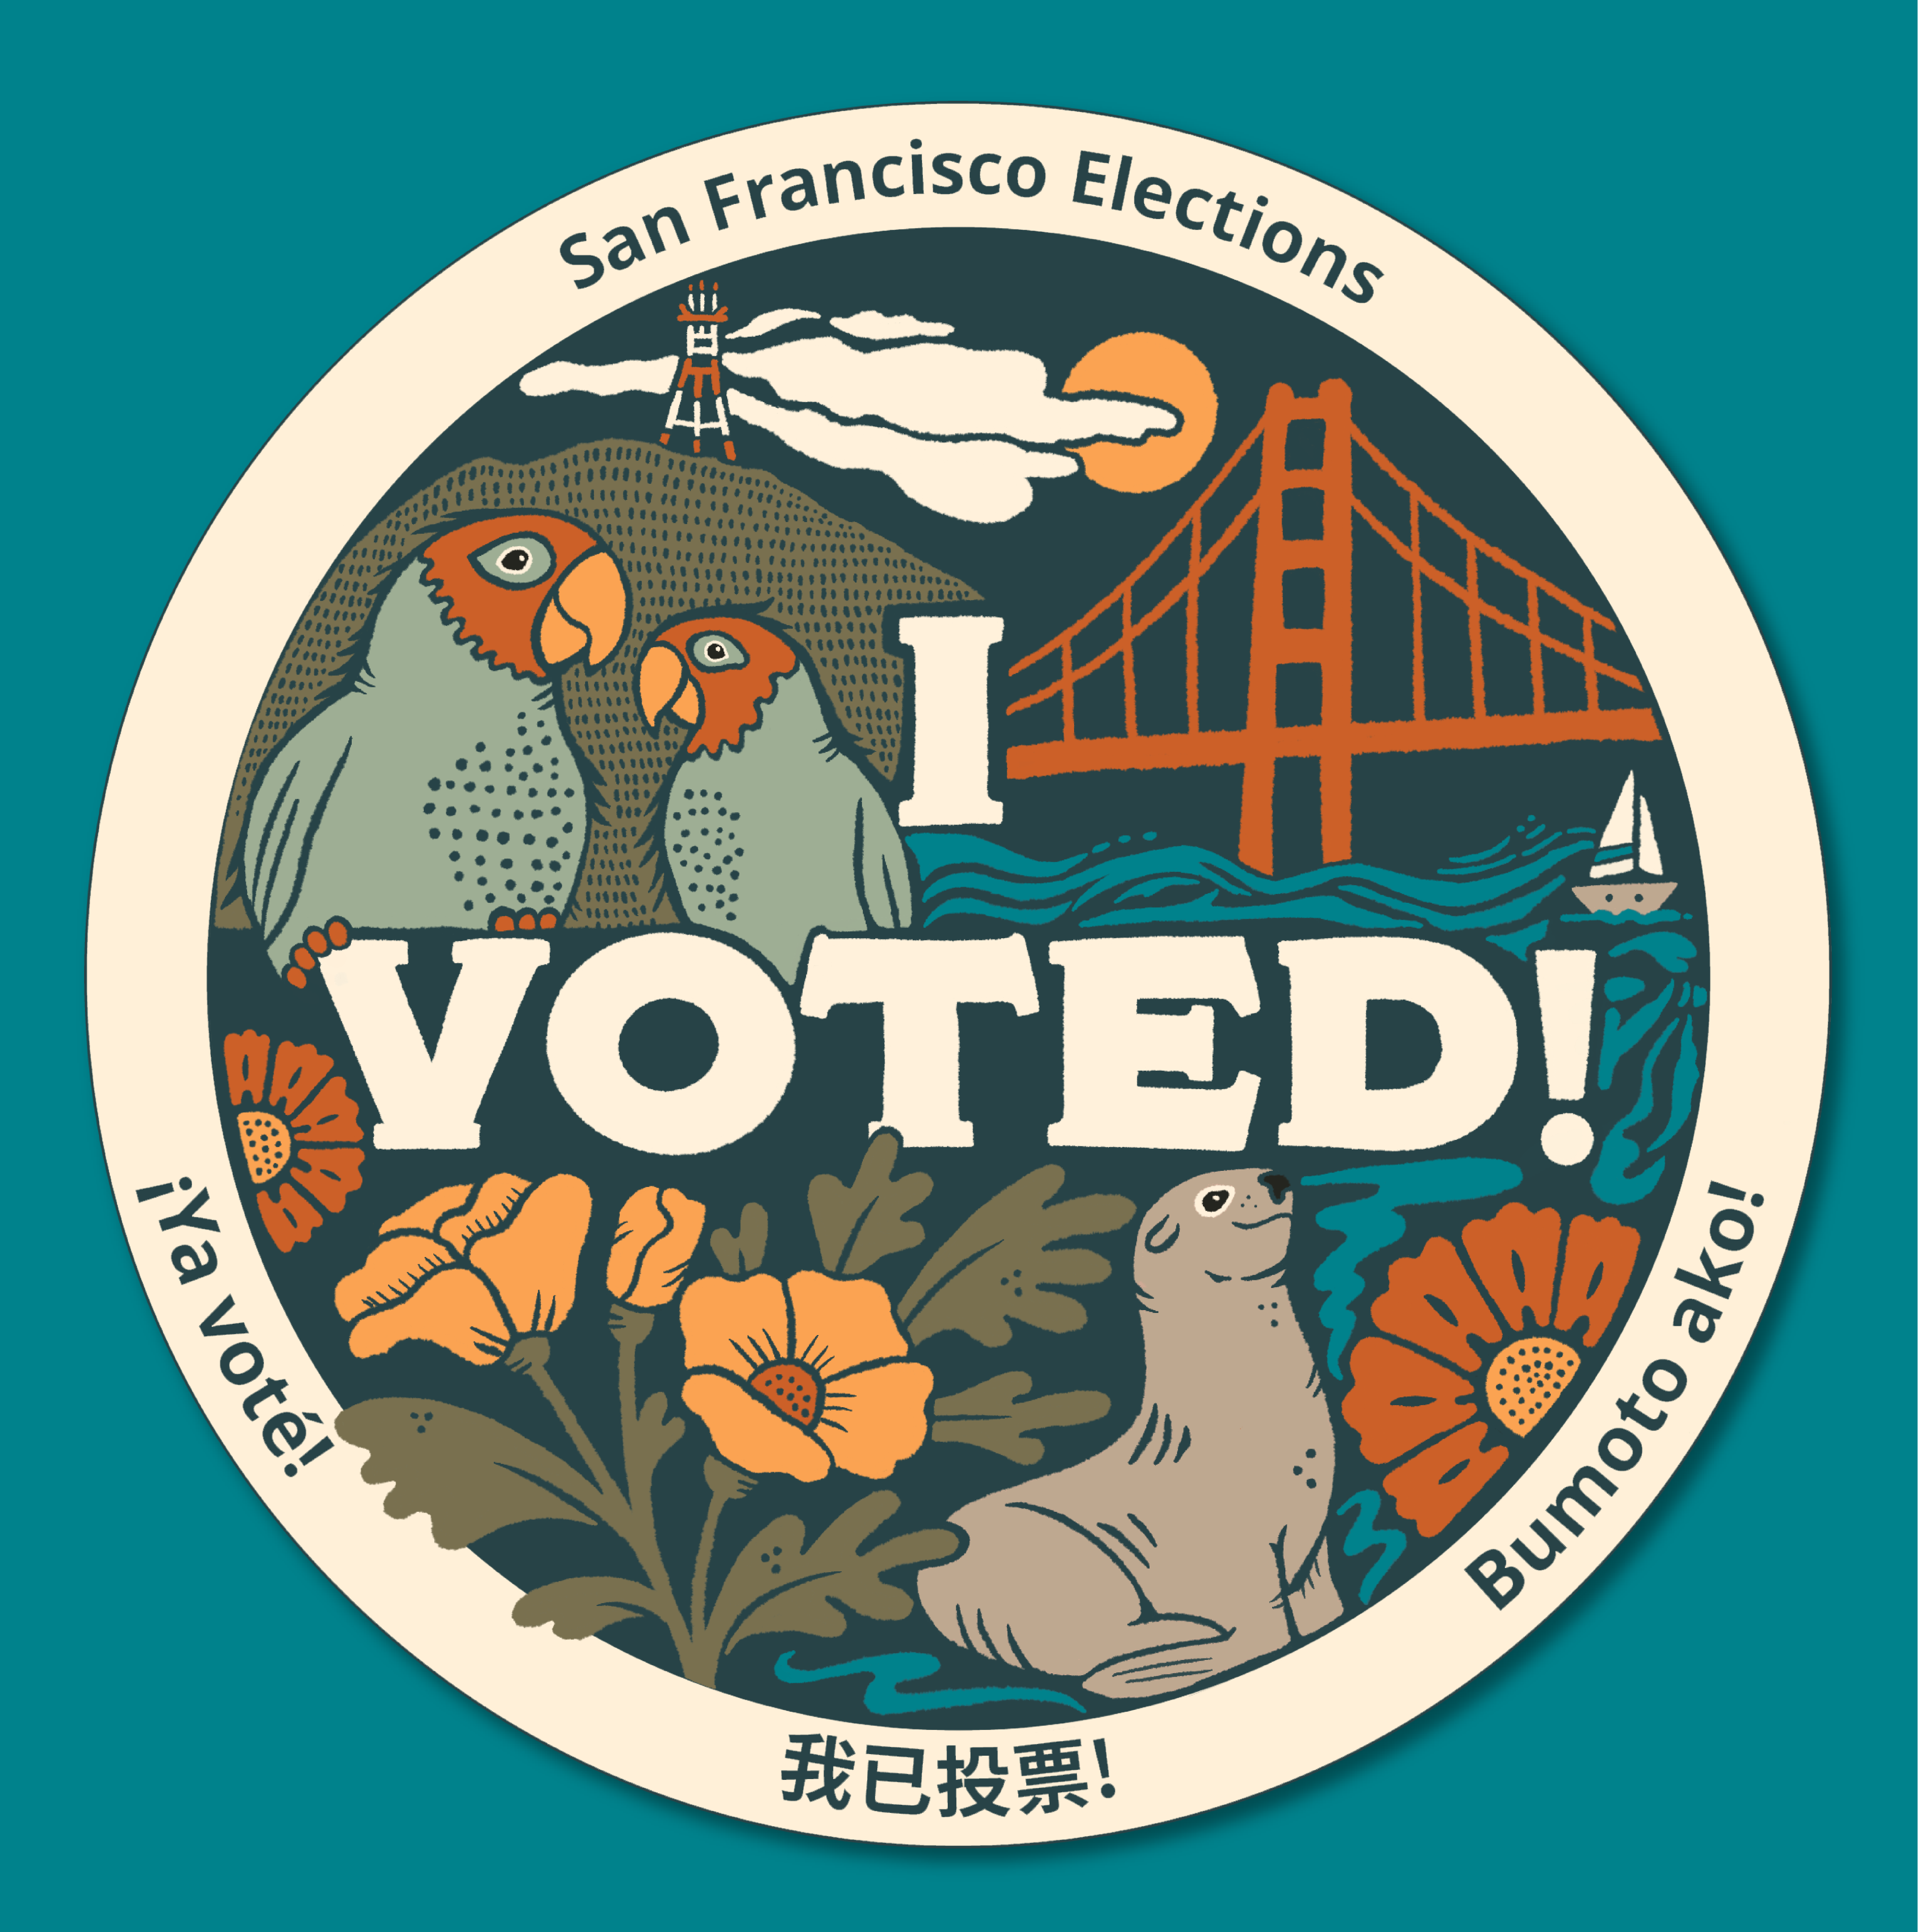 Hollis Callas Creates “I Voted!” Sticker for SF Department of Elections